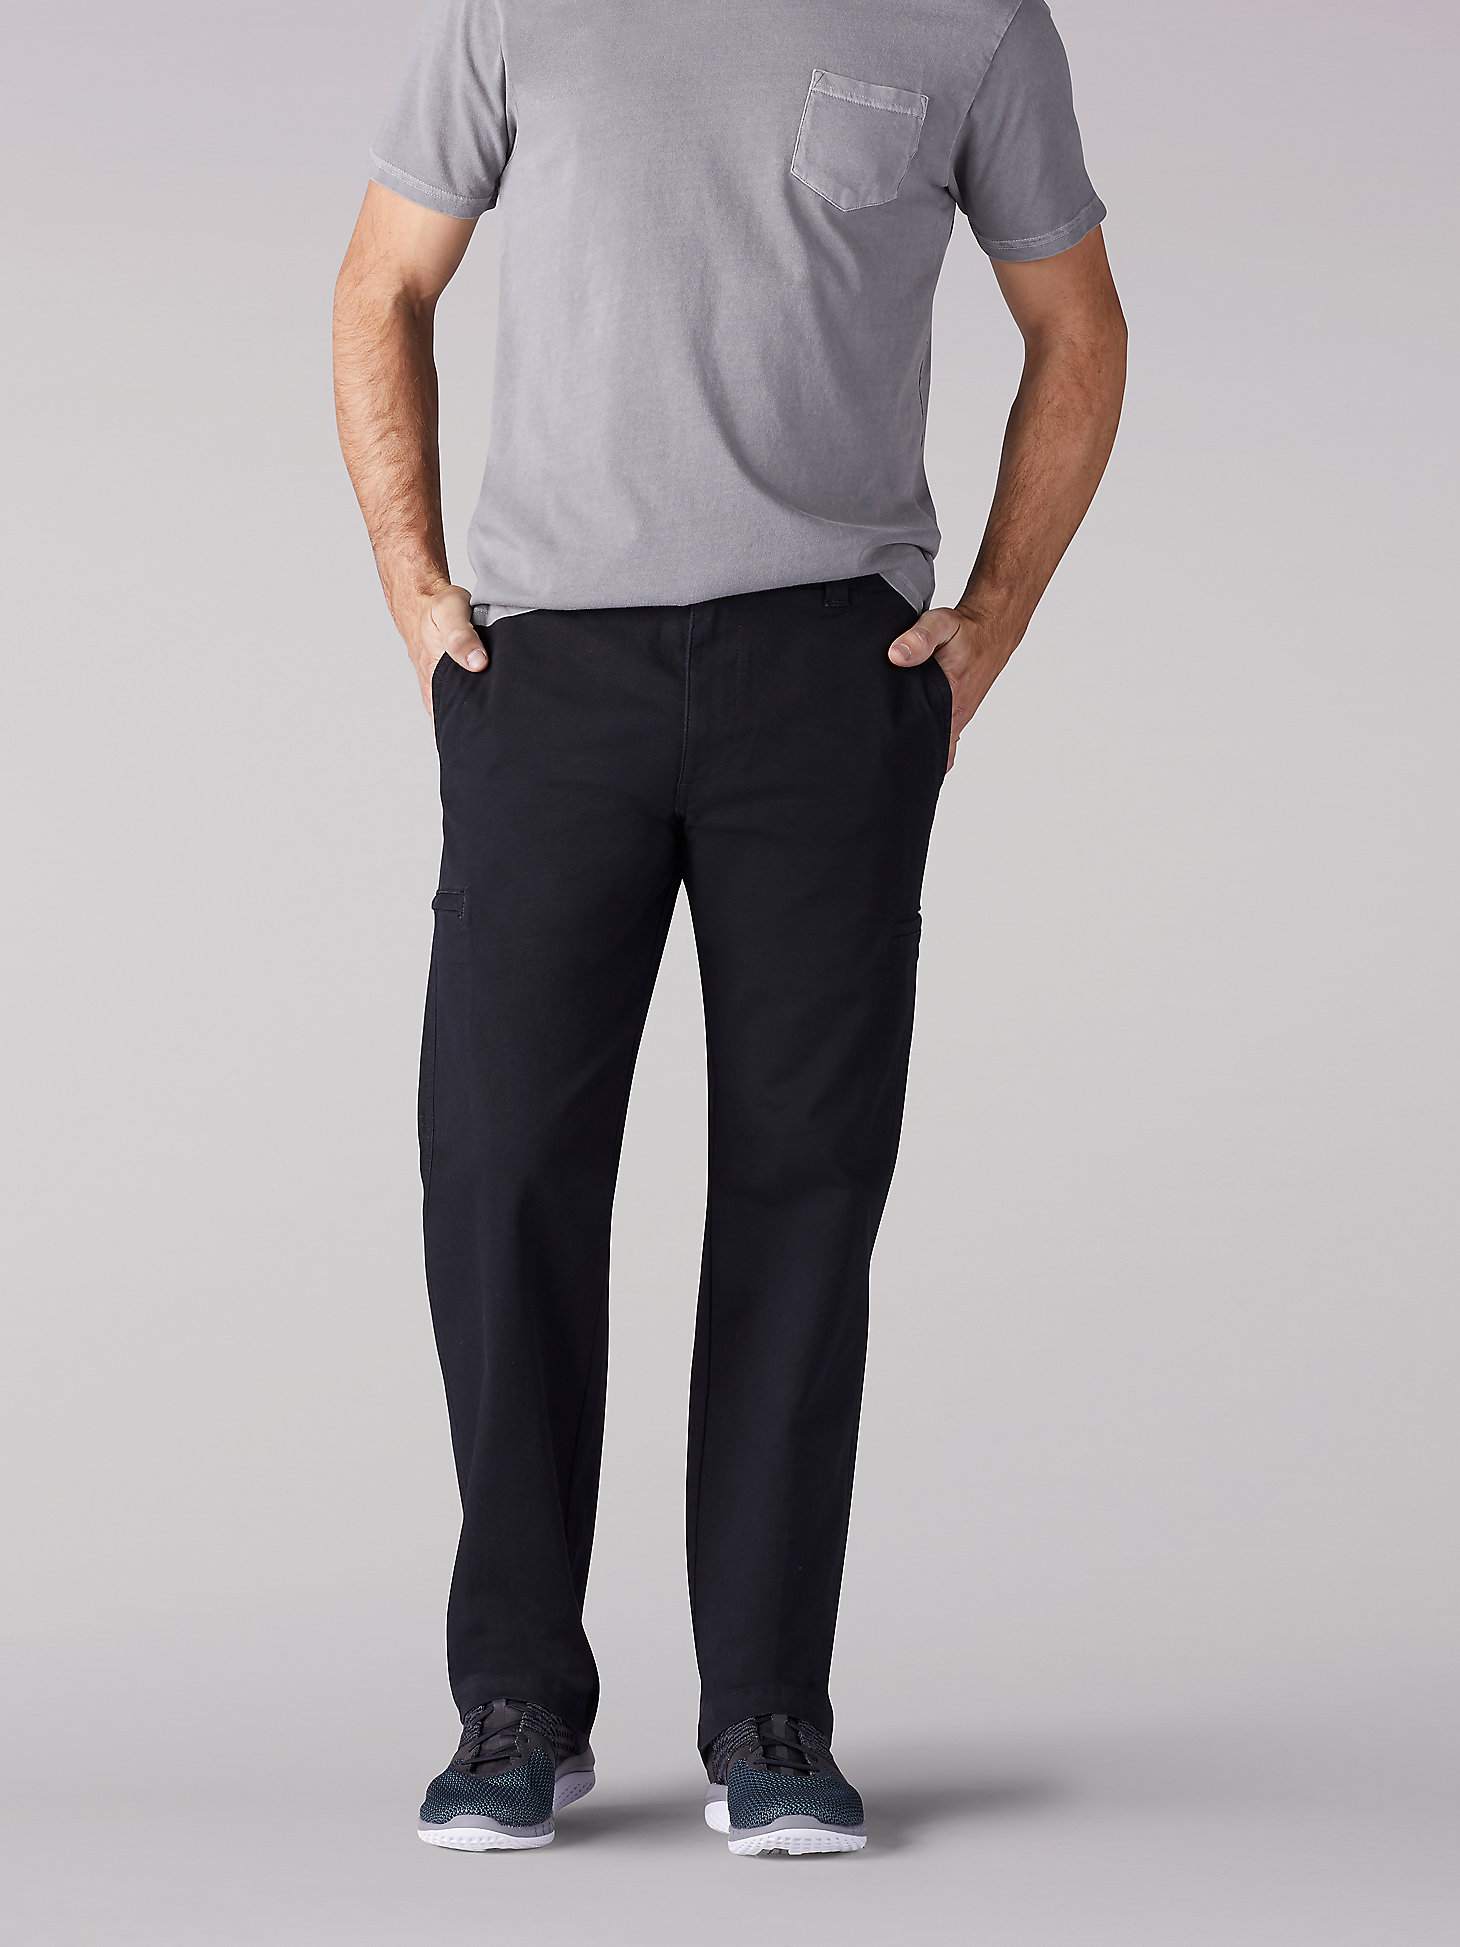 Men's Extreme Motion Straight Fit Cargo Pant (Big & Tall) in Black main view